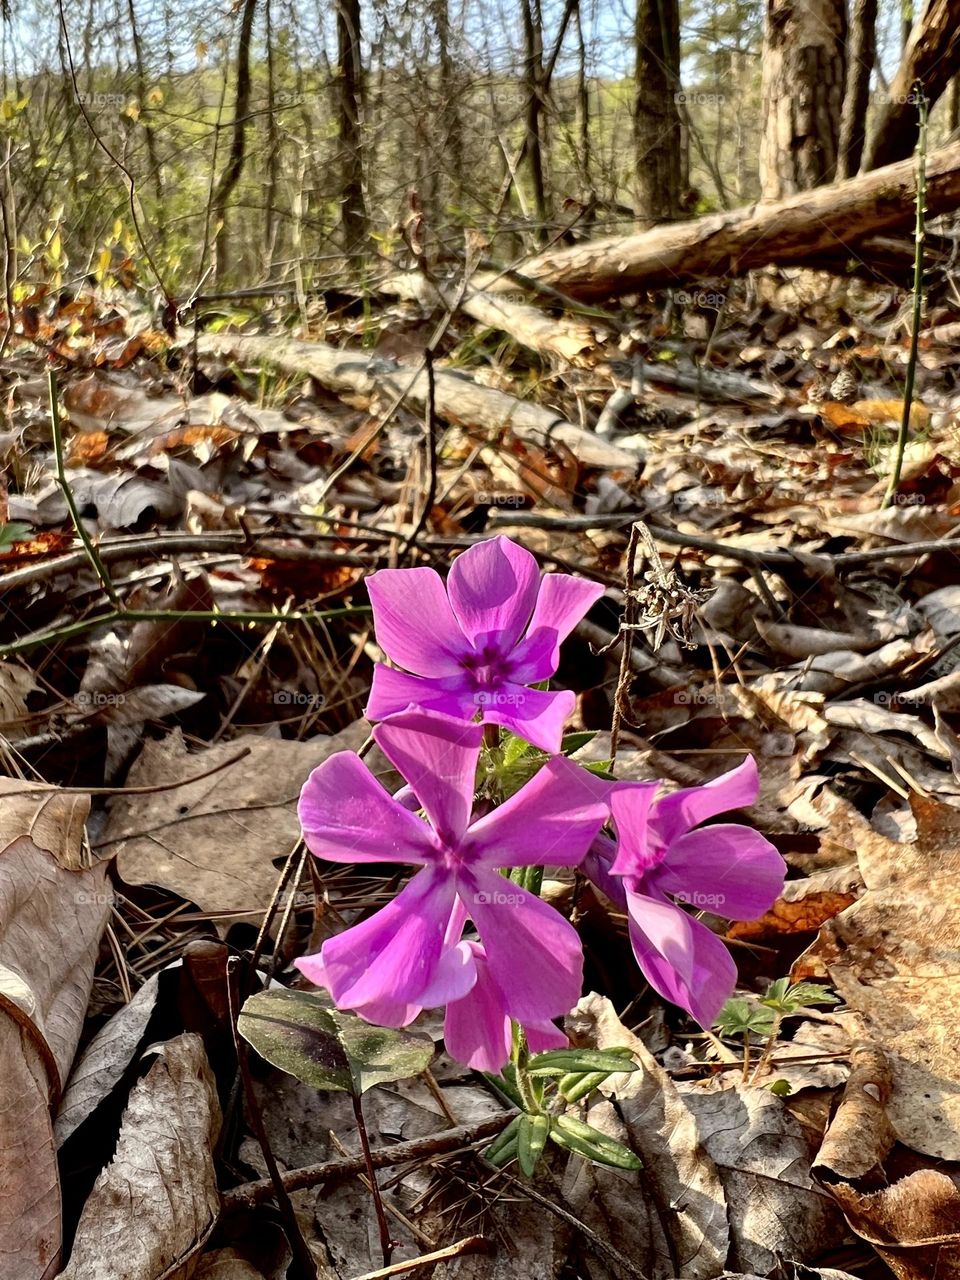 Spring wildflowers appearing in the fallen leaves and bare trees, signaling warmer weather is truly on the way.